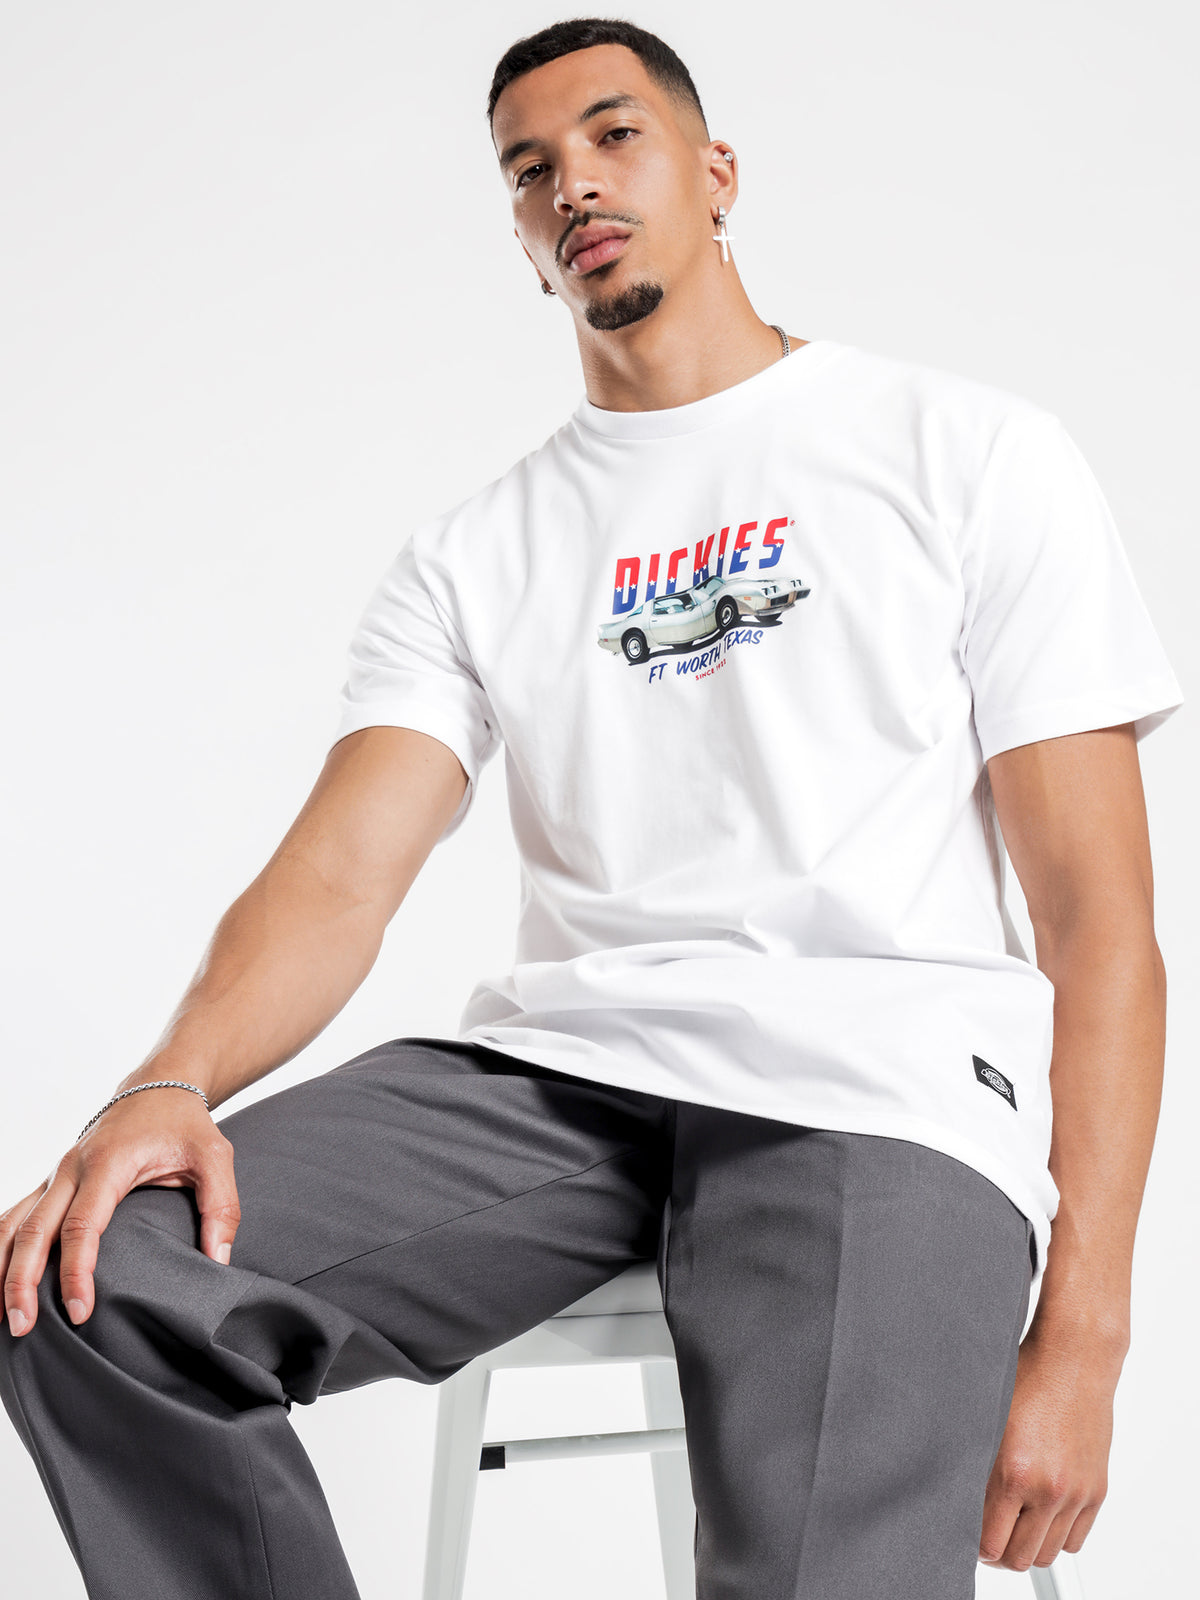 Duro Classic Fit Short Sleeve T-Shirt in White